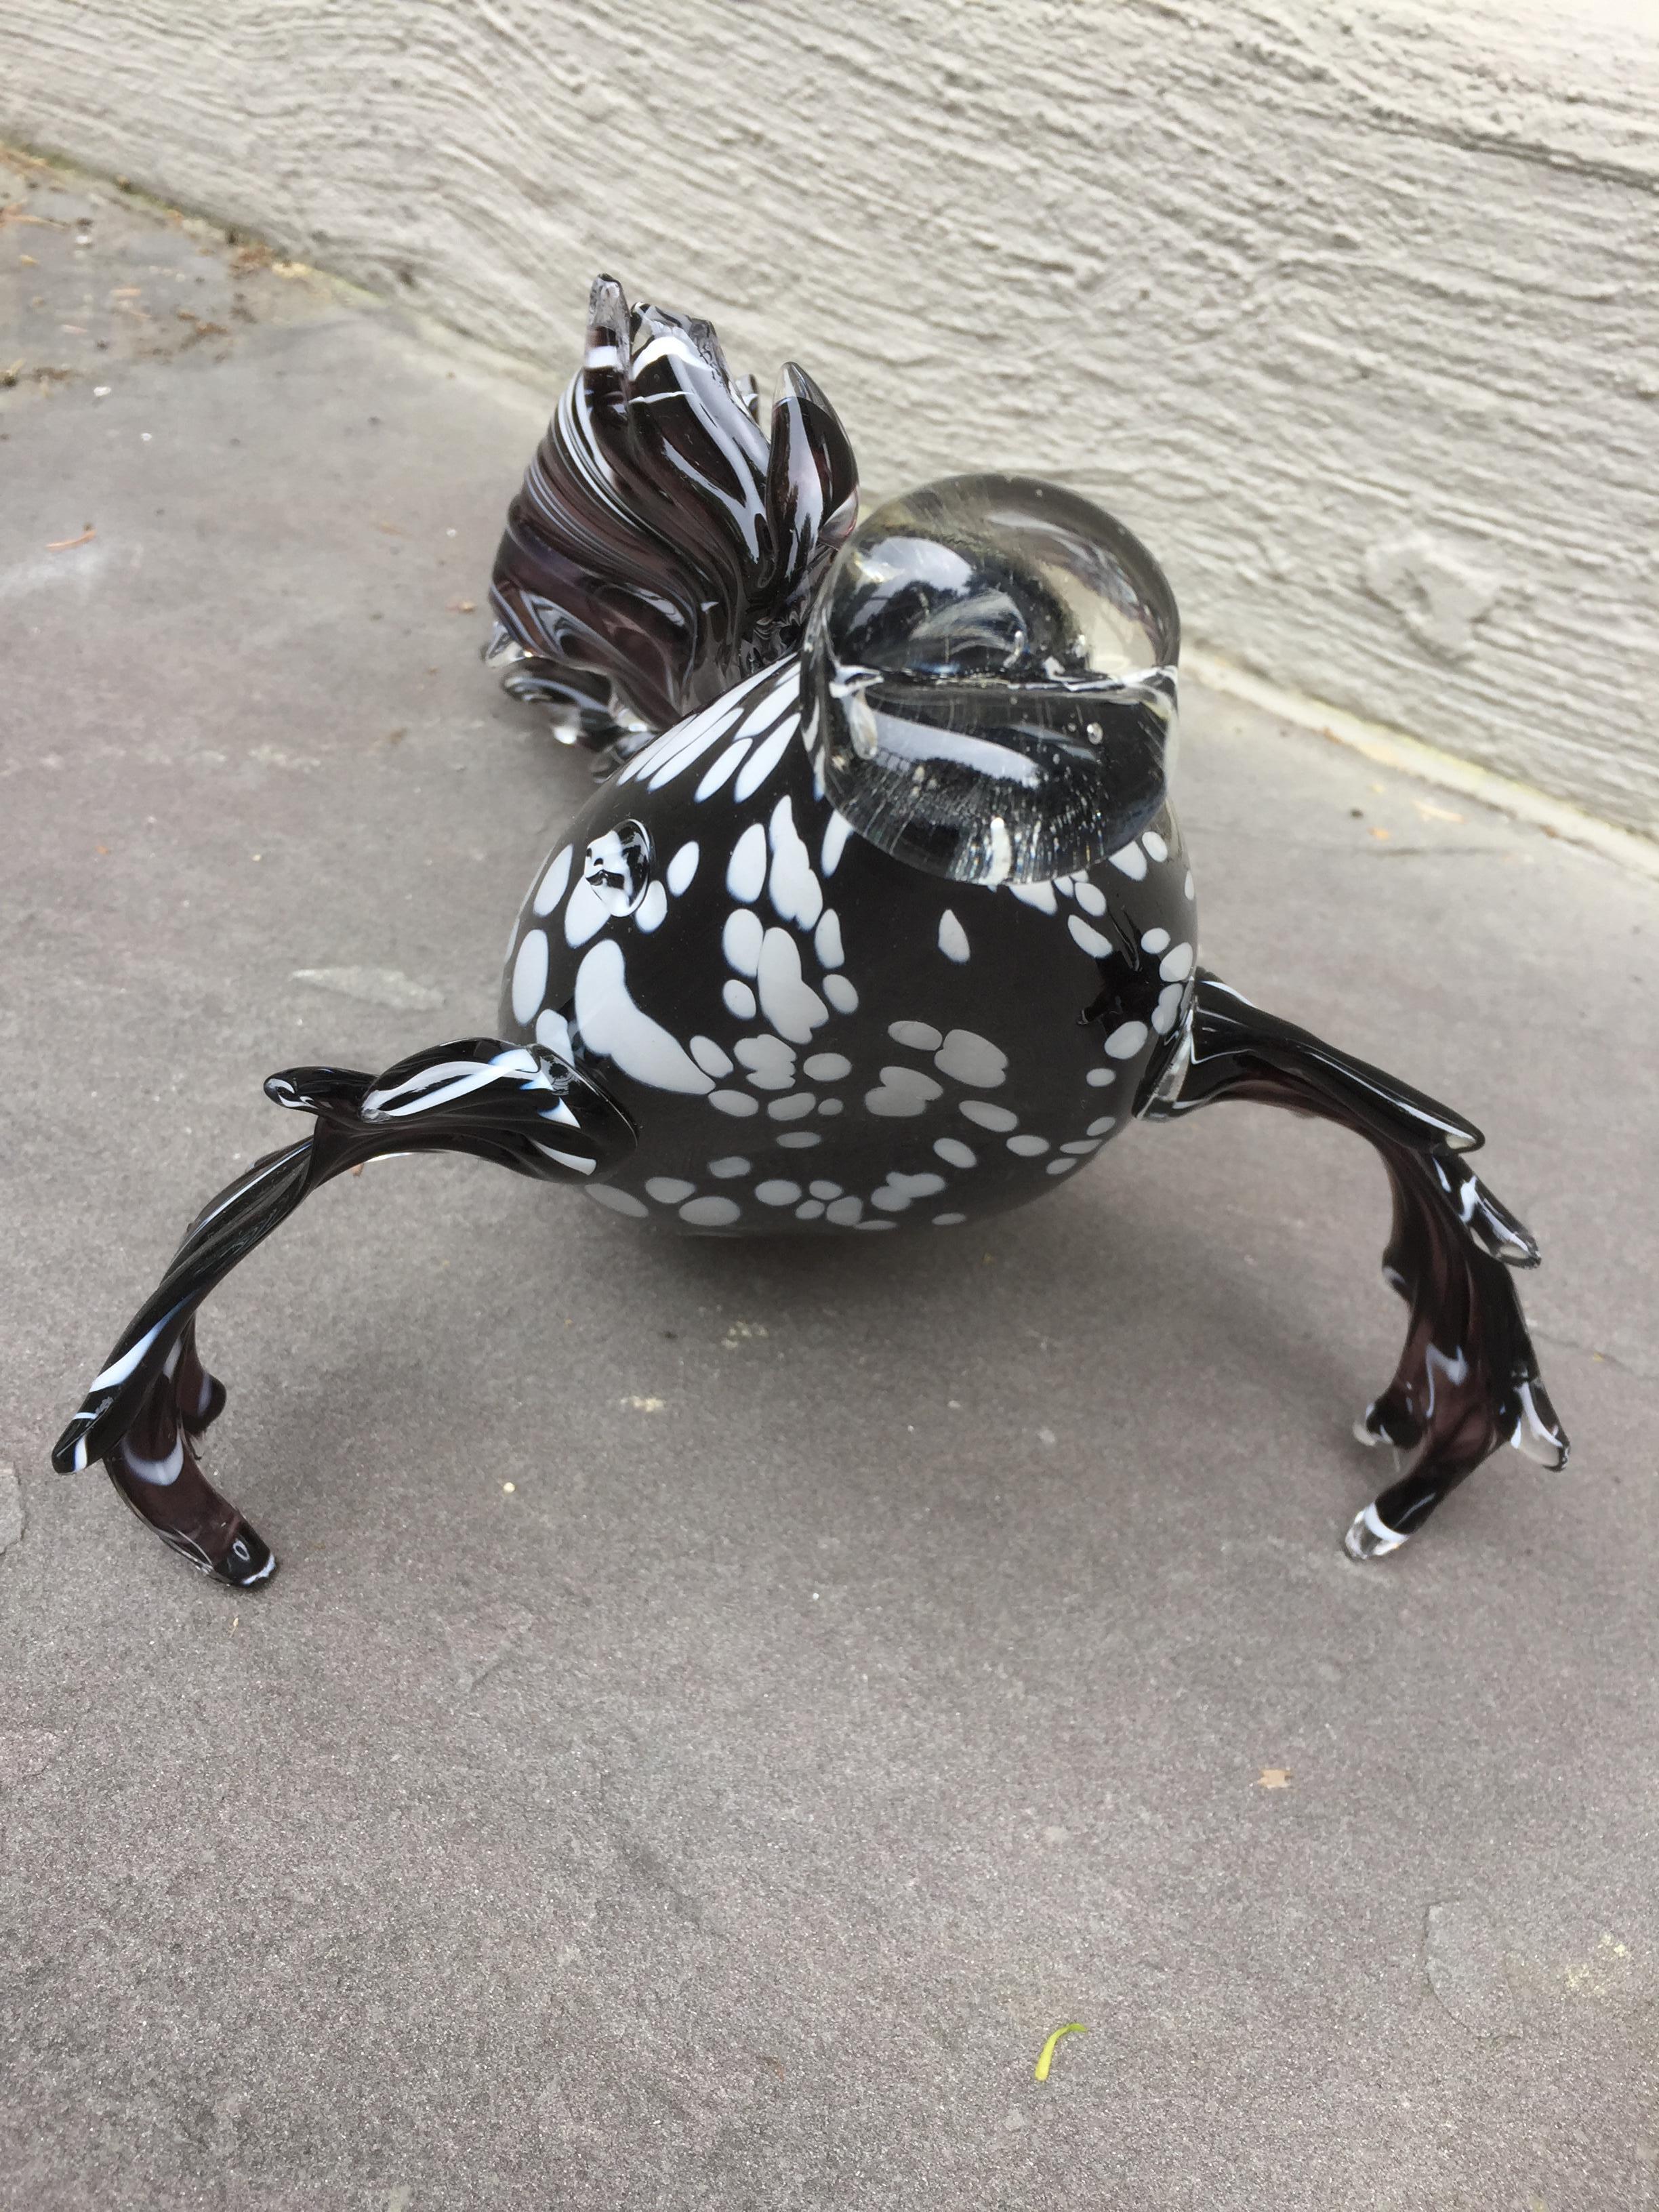 Venetian Murano glass fish sculpture, late 20th century 
Italian Venetian, fish sculpture, blown Murano glass, black and white 

The abstract fish is a massive opaque transparent blown glass, with red, black, white stripes along the body. The